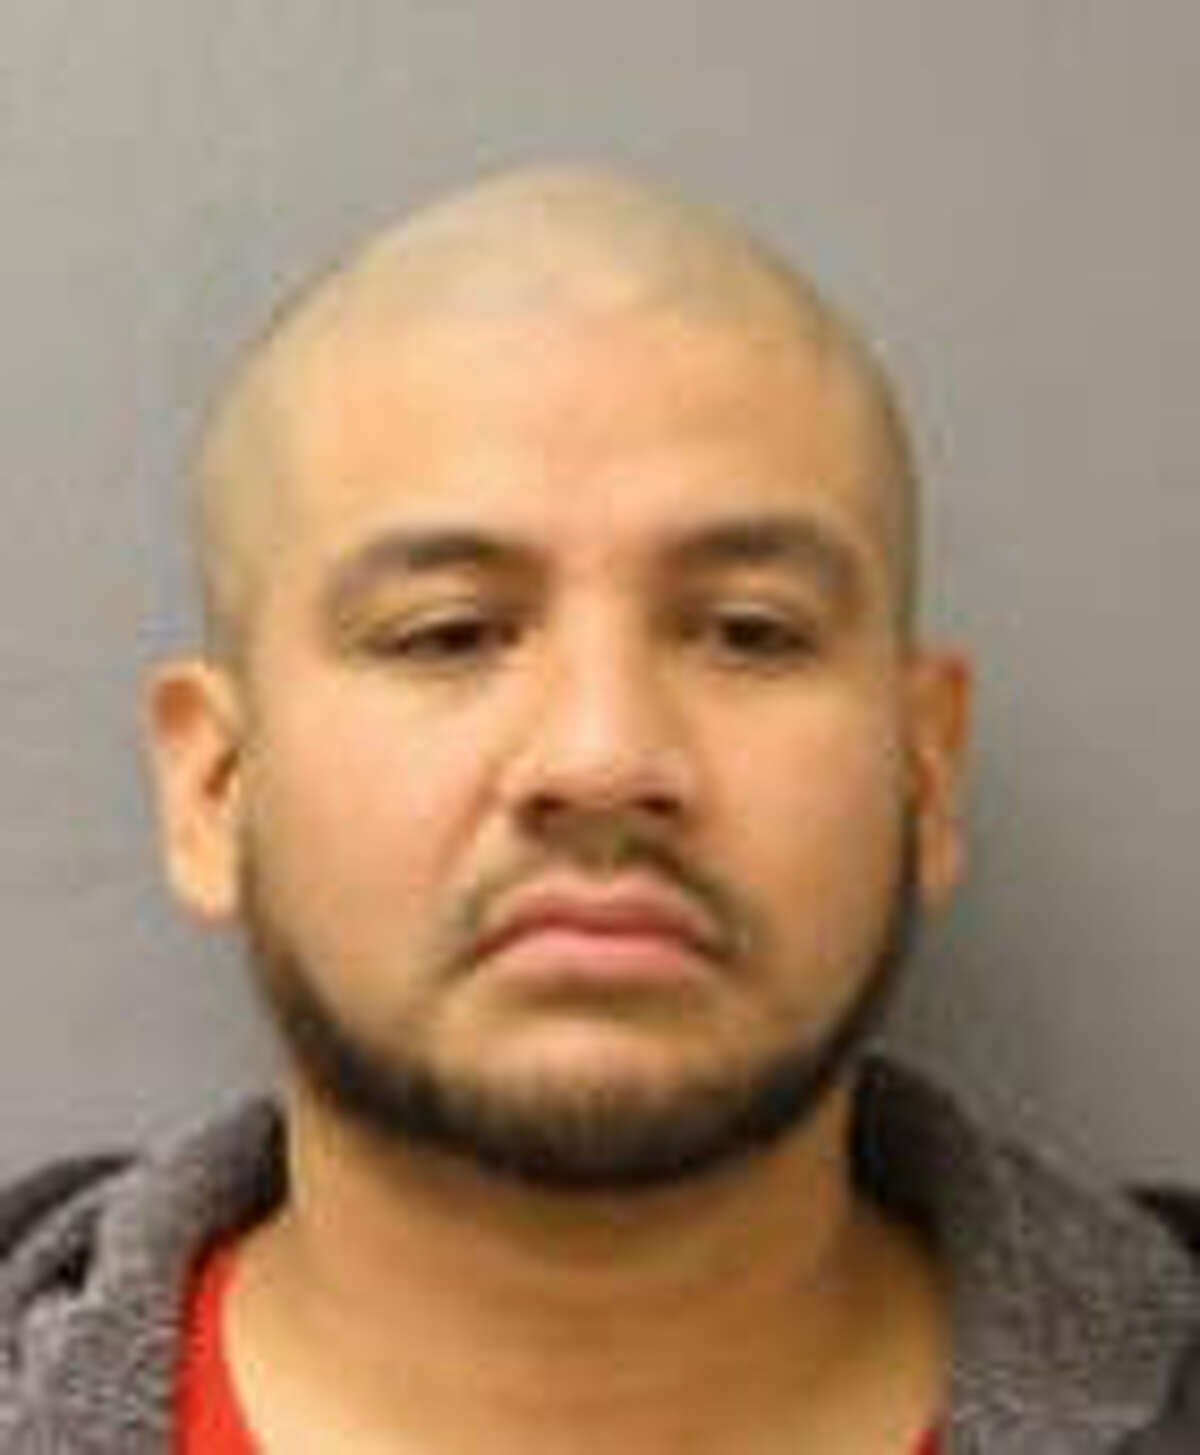 Felix Ruiz, who was charged Sunday with murder, is shown here in a prior booking photo.